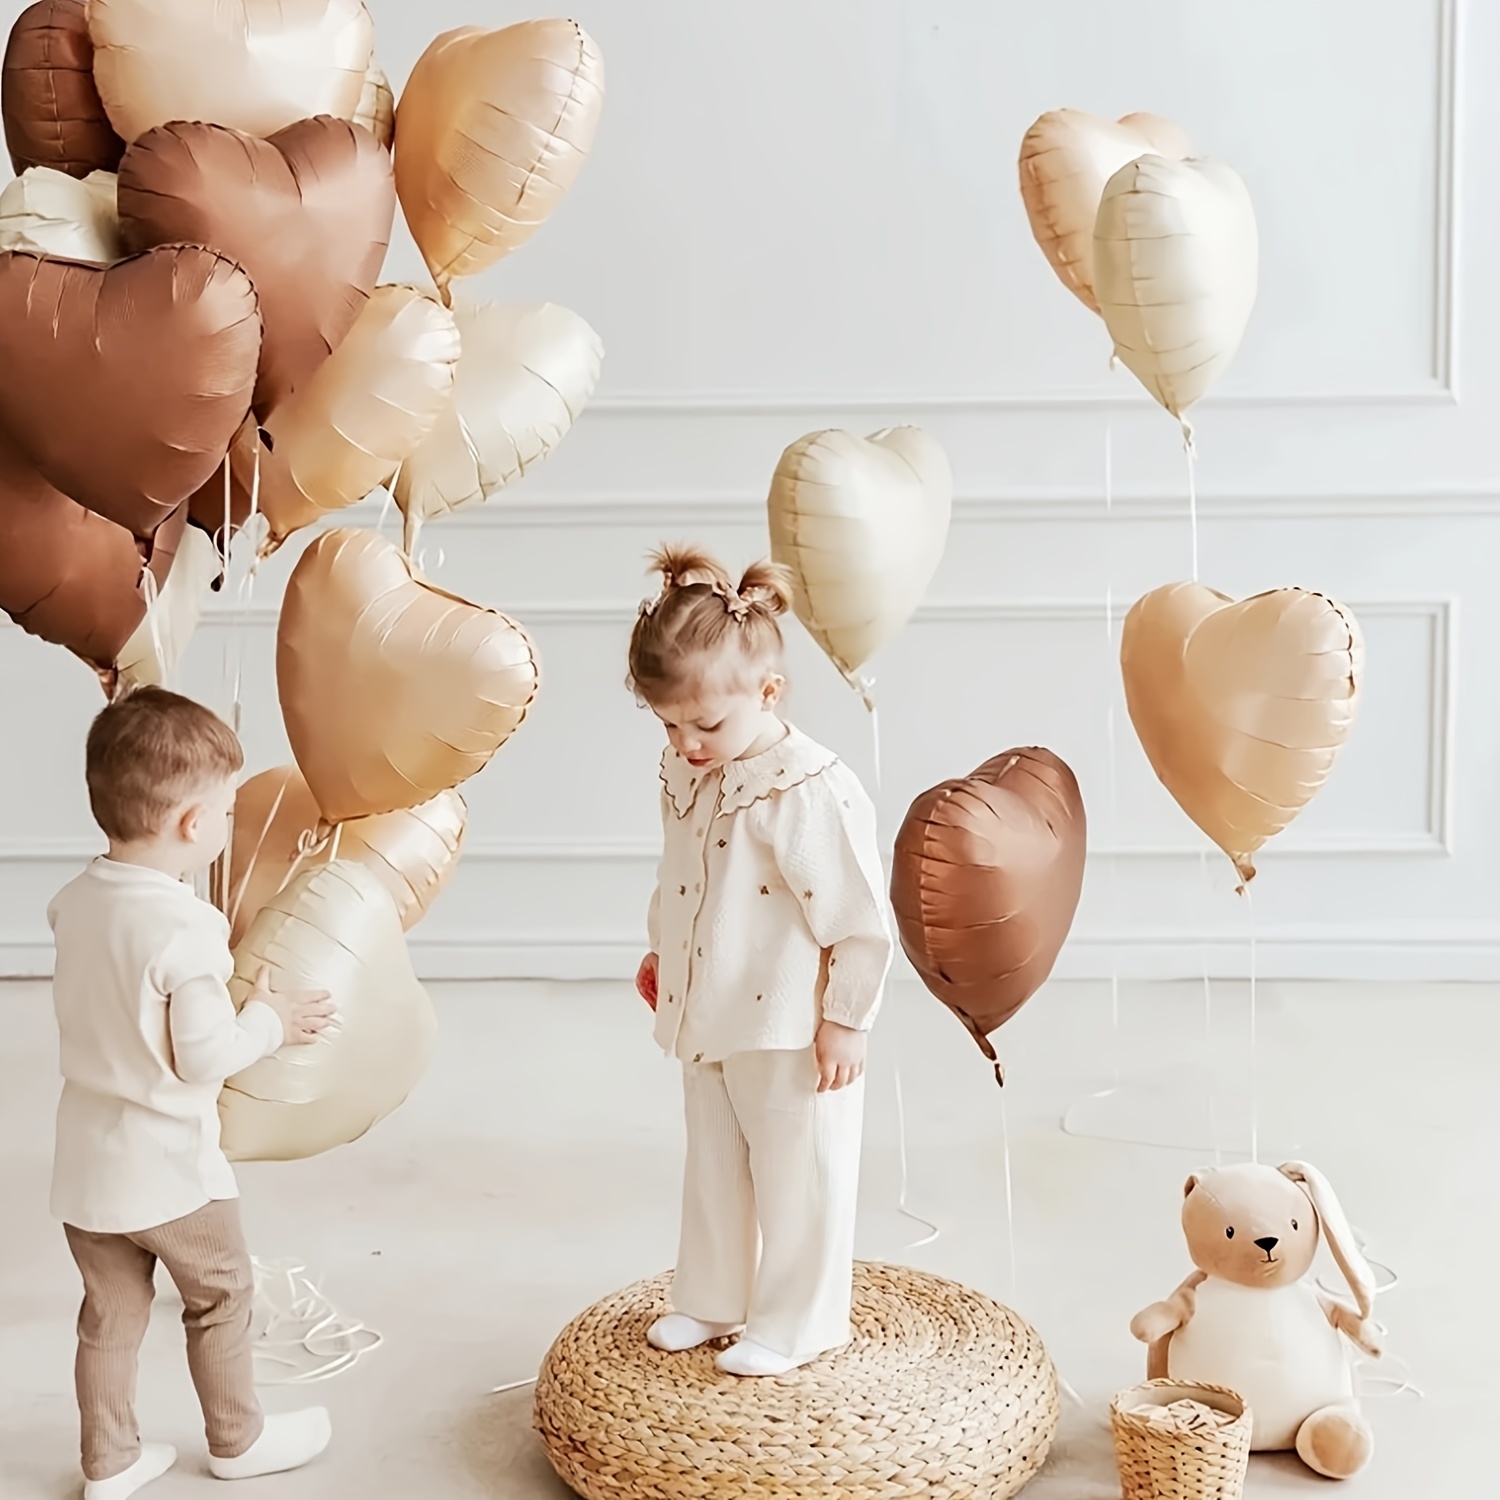 

18-inch Heart-shaped Foil Balloons In Brown, Apricot & Cream - Perfect For Valentine's Day, Engagements, Birthdays, Baby Showers & Weddings